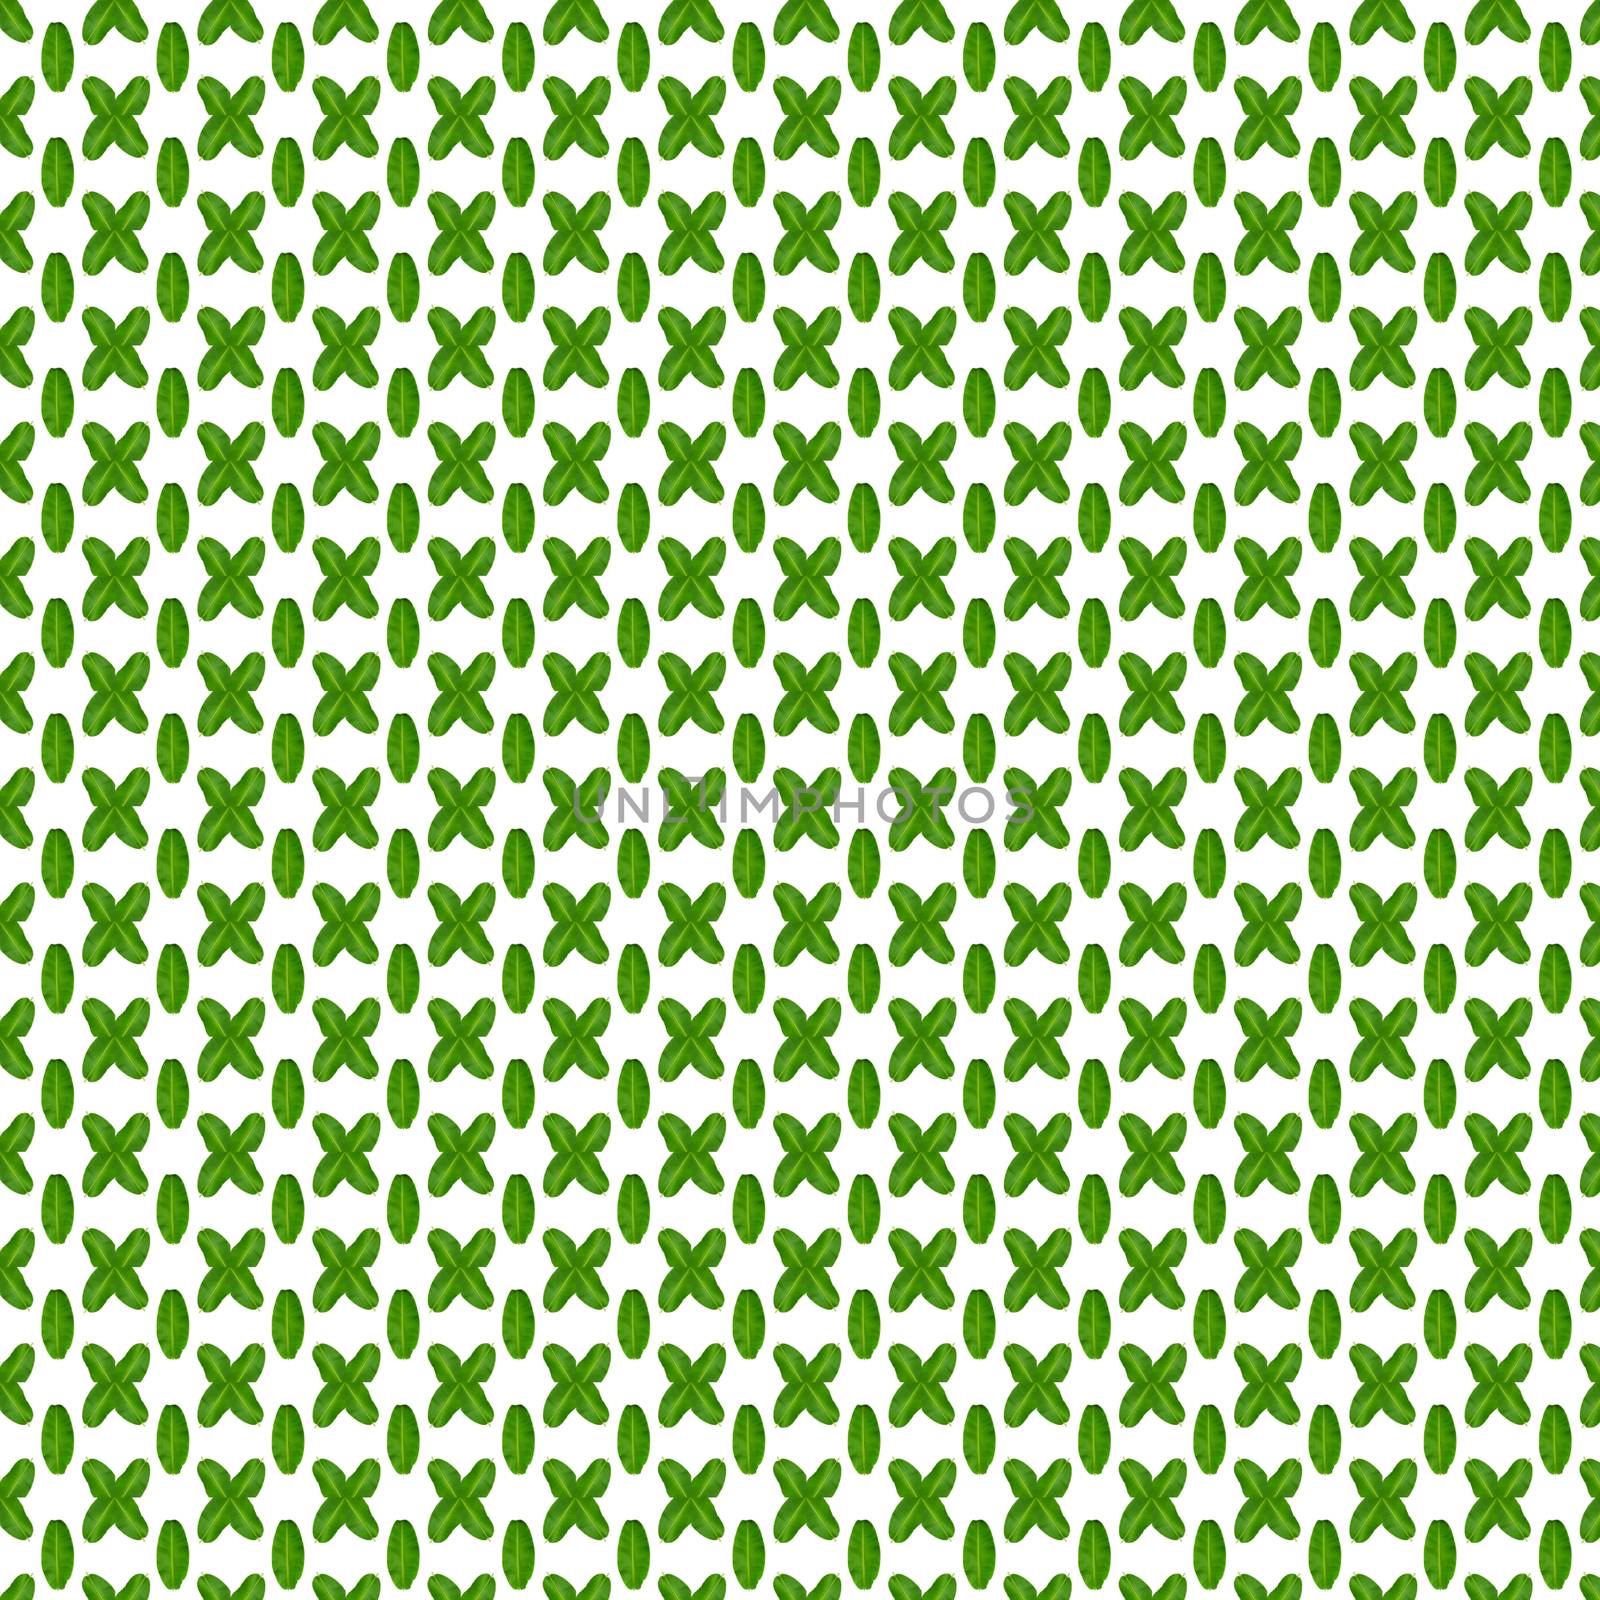 Seamless pattern of green banana leaves on white background. by Unimages2527